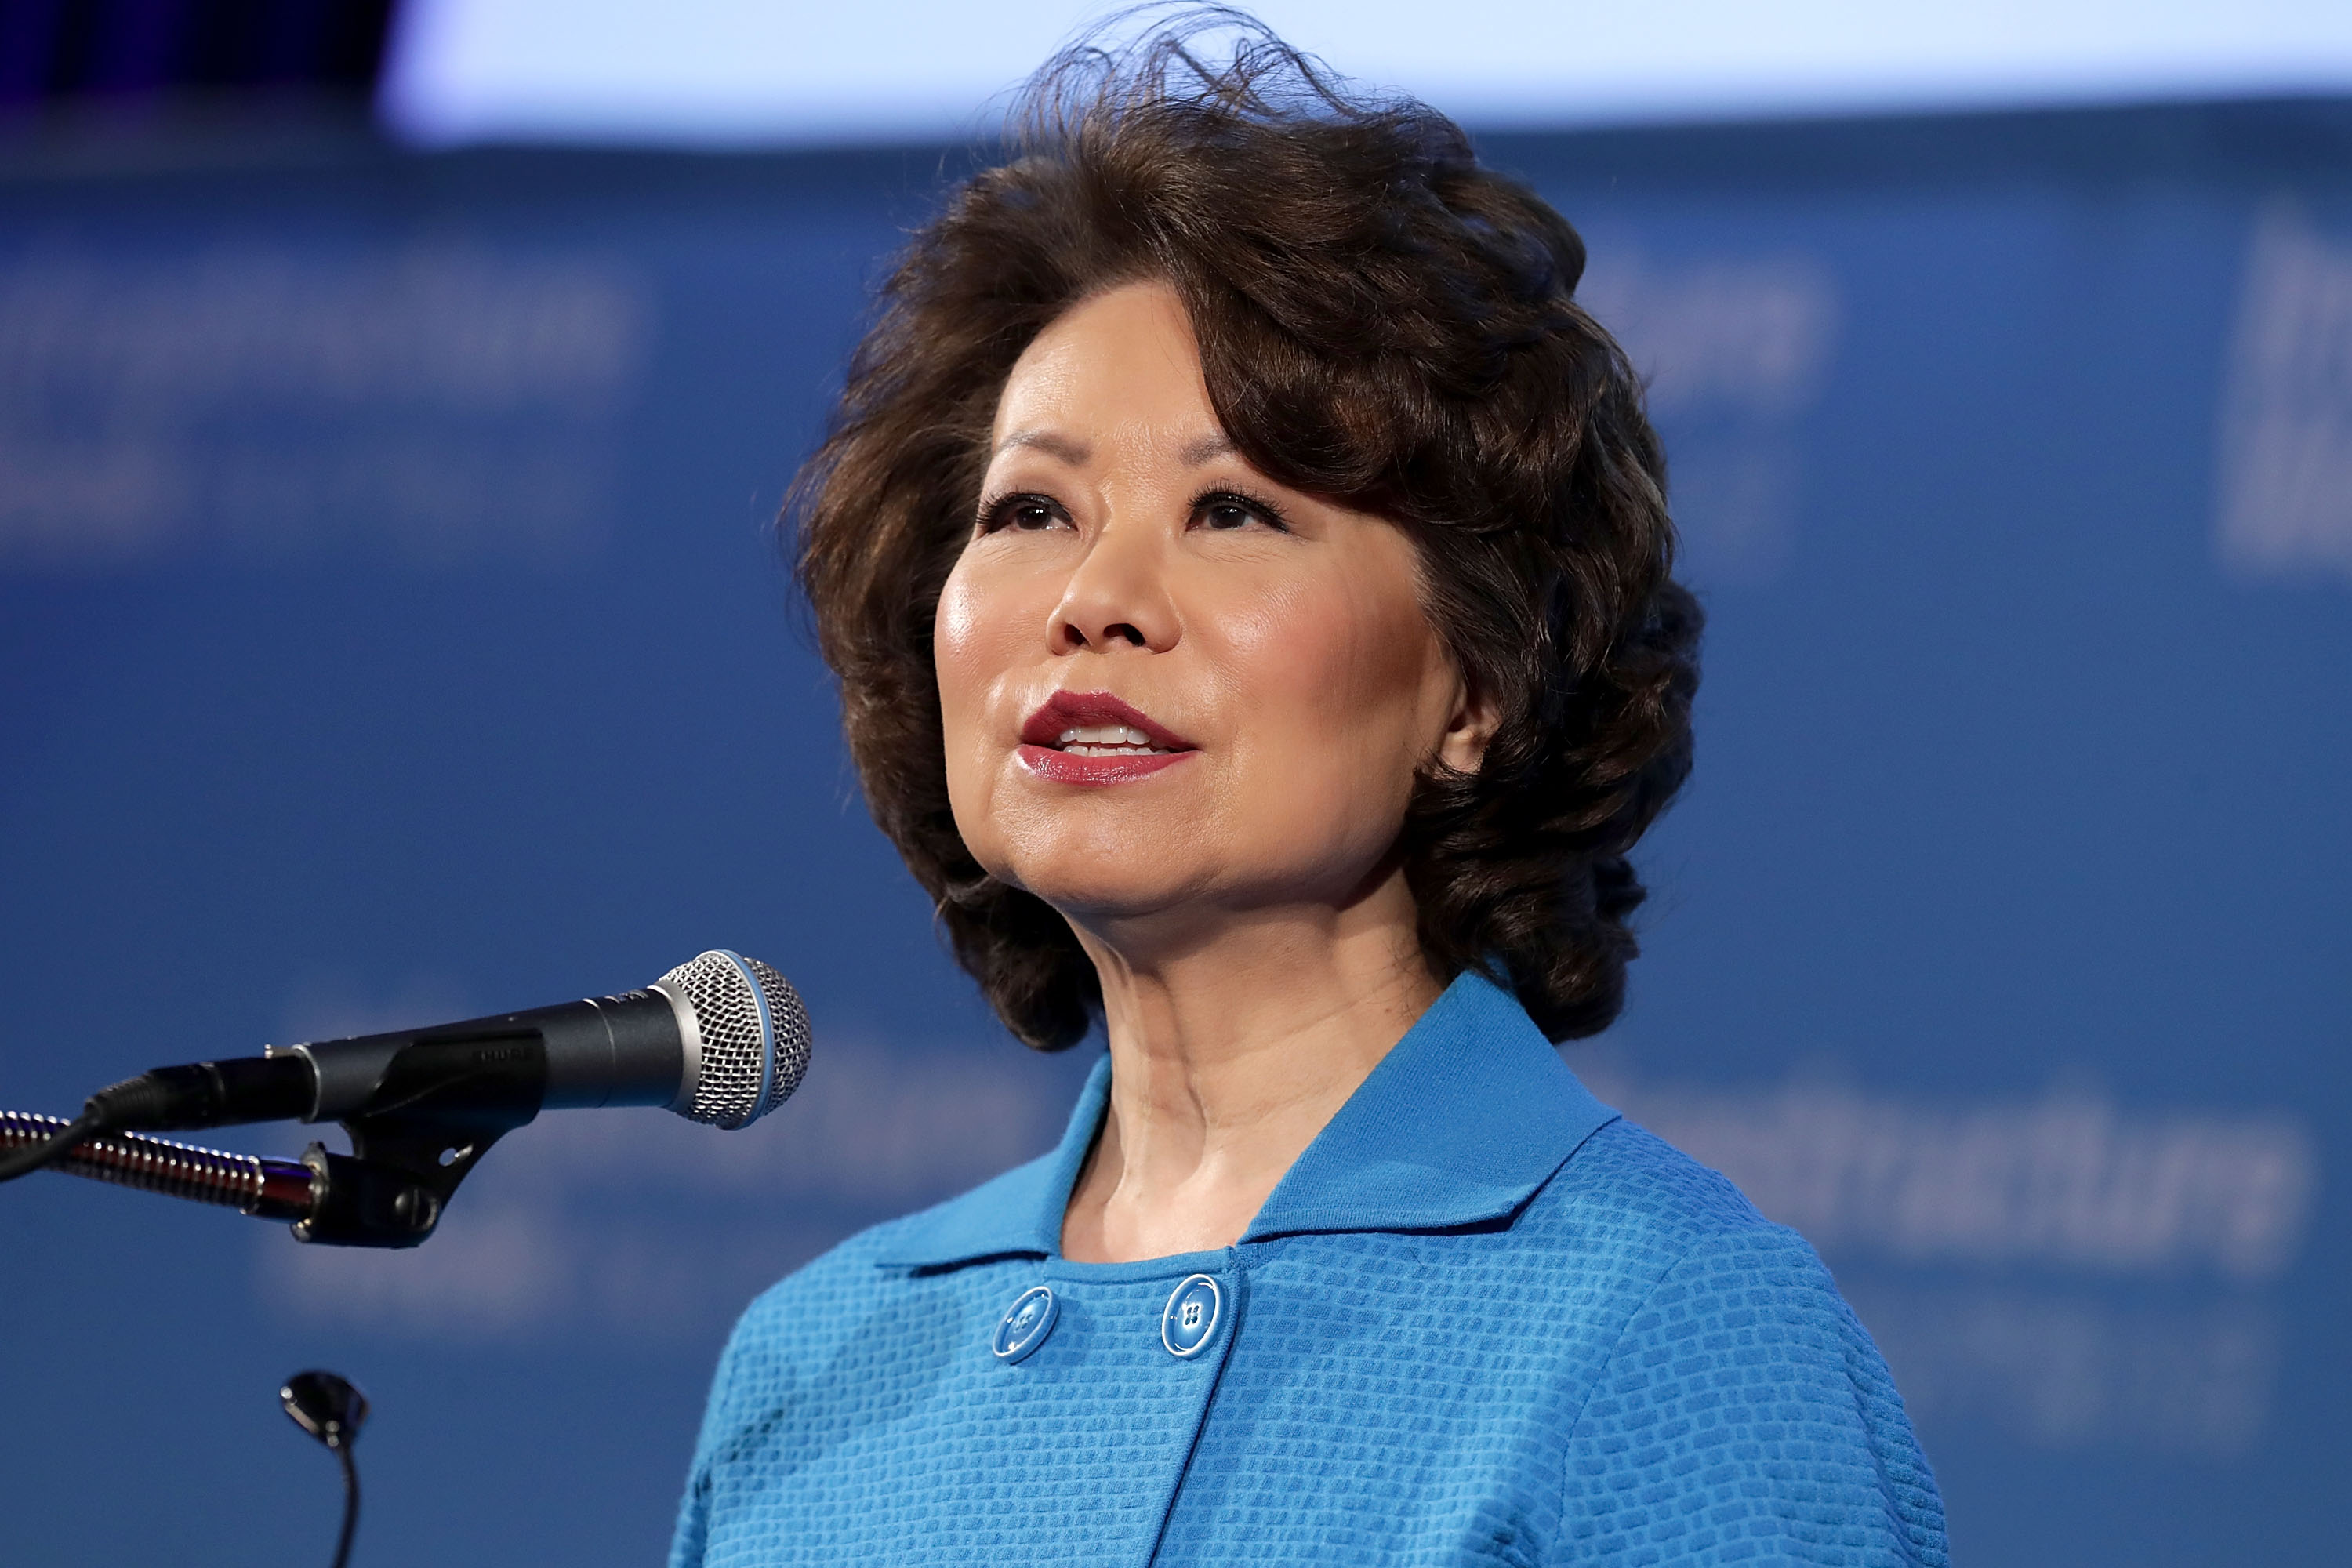 WASHINGTON, DC - MAY 15:  U.S. Transportation Secretary Elaine Chao delivers remarks during the U.S. Chamber of Commerce's 'Infrastructure Week' program  May 15, 2017 in Washington, DC. Chao highlighted the repair of the I-85 Atlanta highway bridge that collapsed March 30 as an example of public-private work that helped repair the damage in record time.  (Photo by Chip Somodevilla/Getty Images) (Chip Somodevilla&mdash;Getty Images)